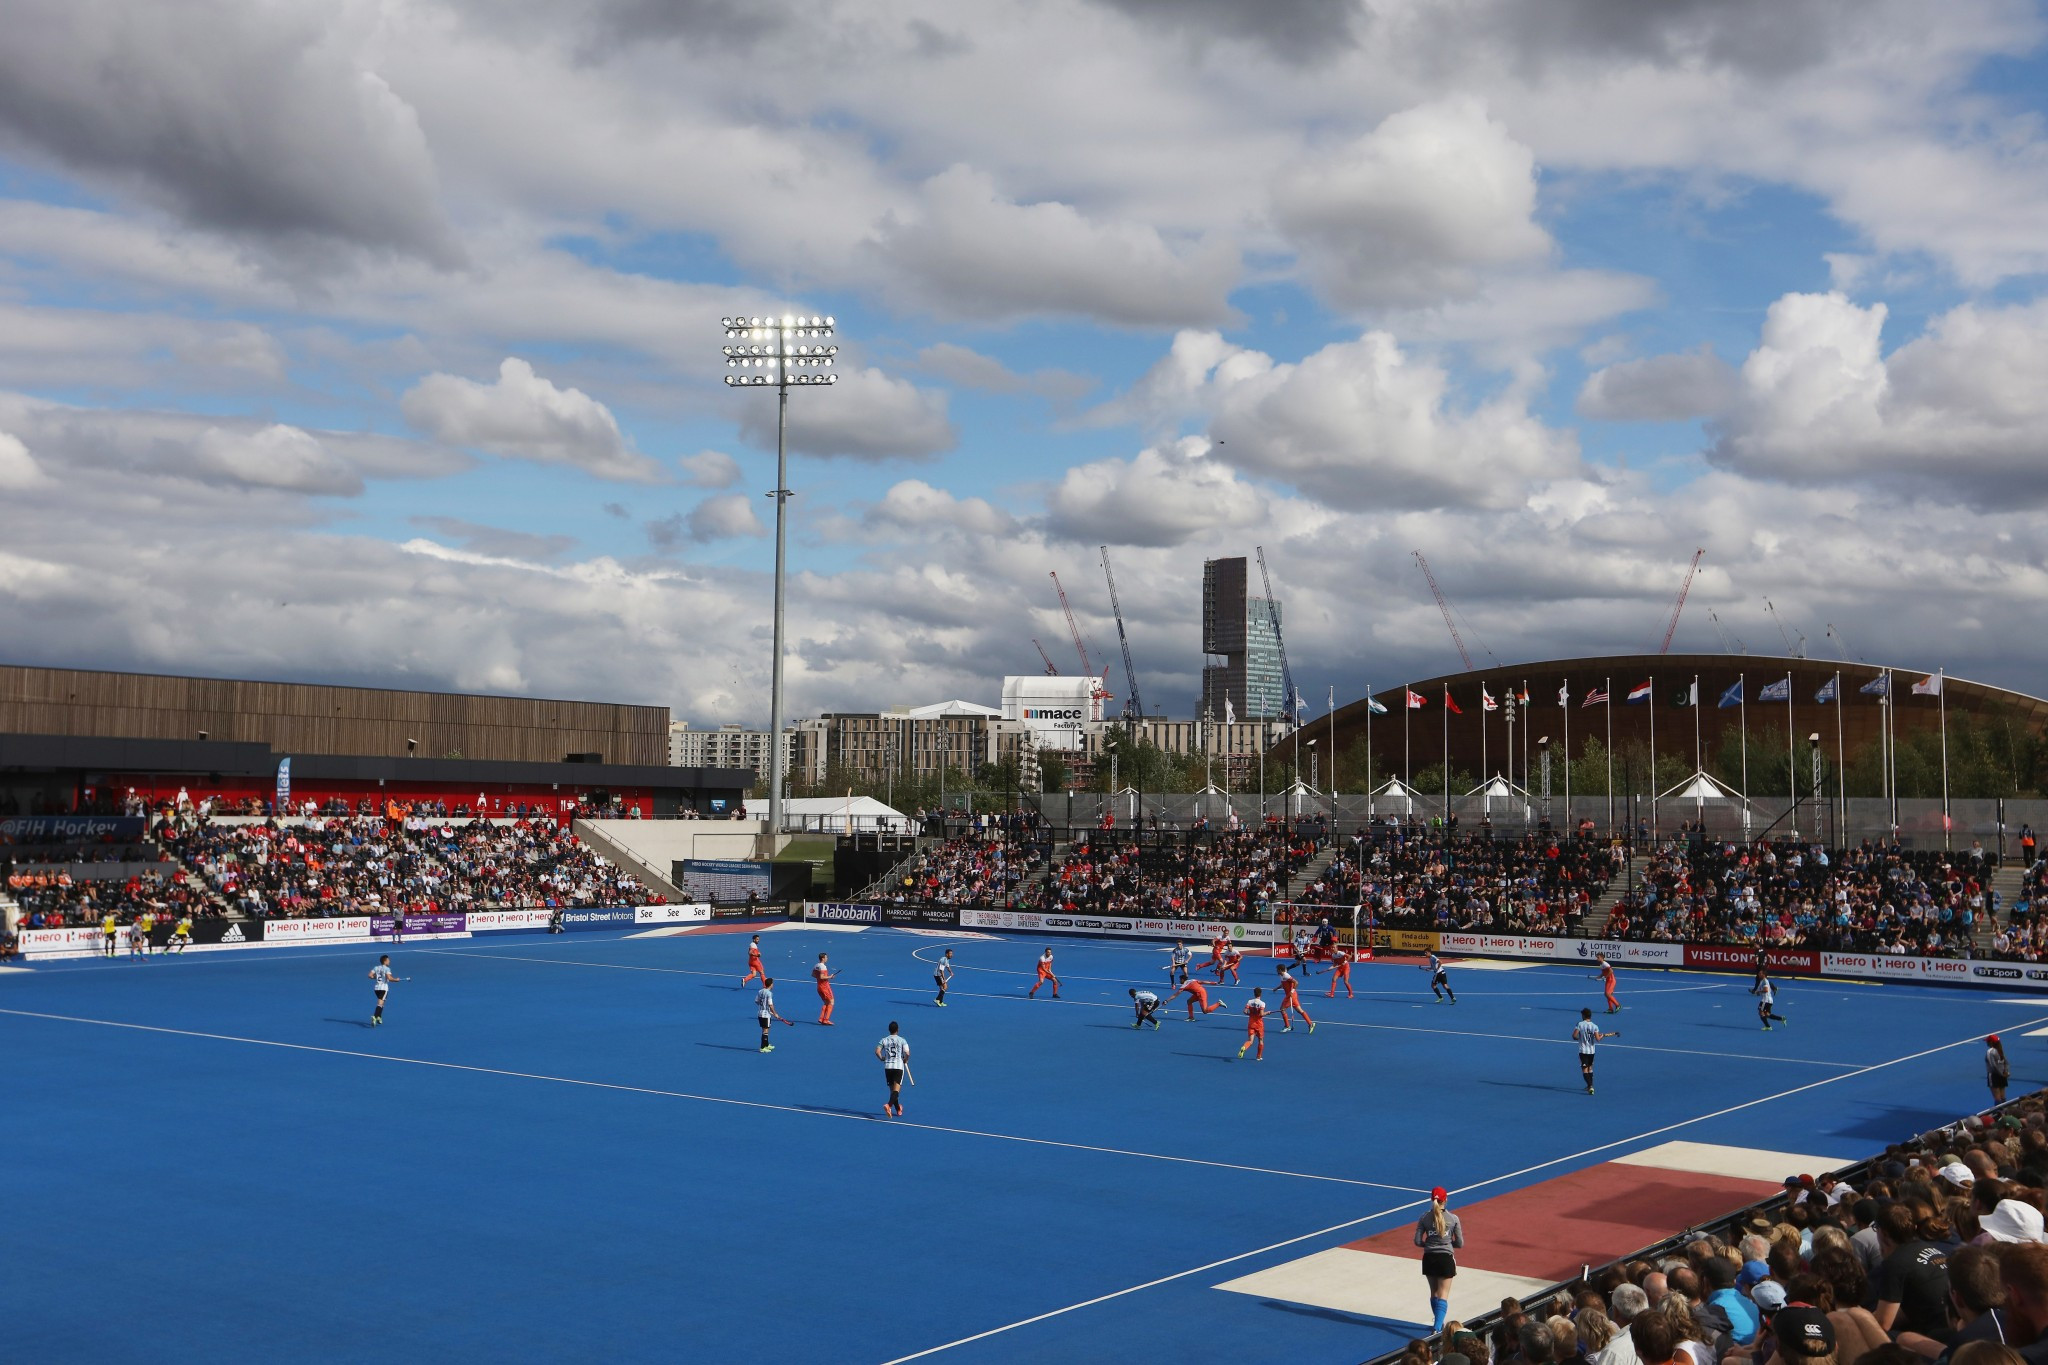 Ticket applications for 2018 Hockey Women’s World Cup surpass 100,000